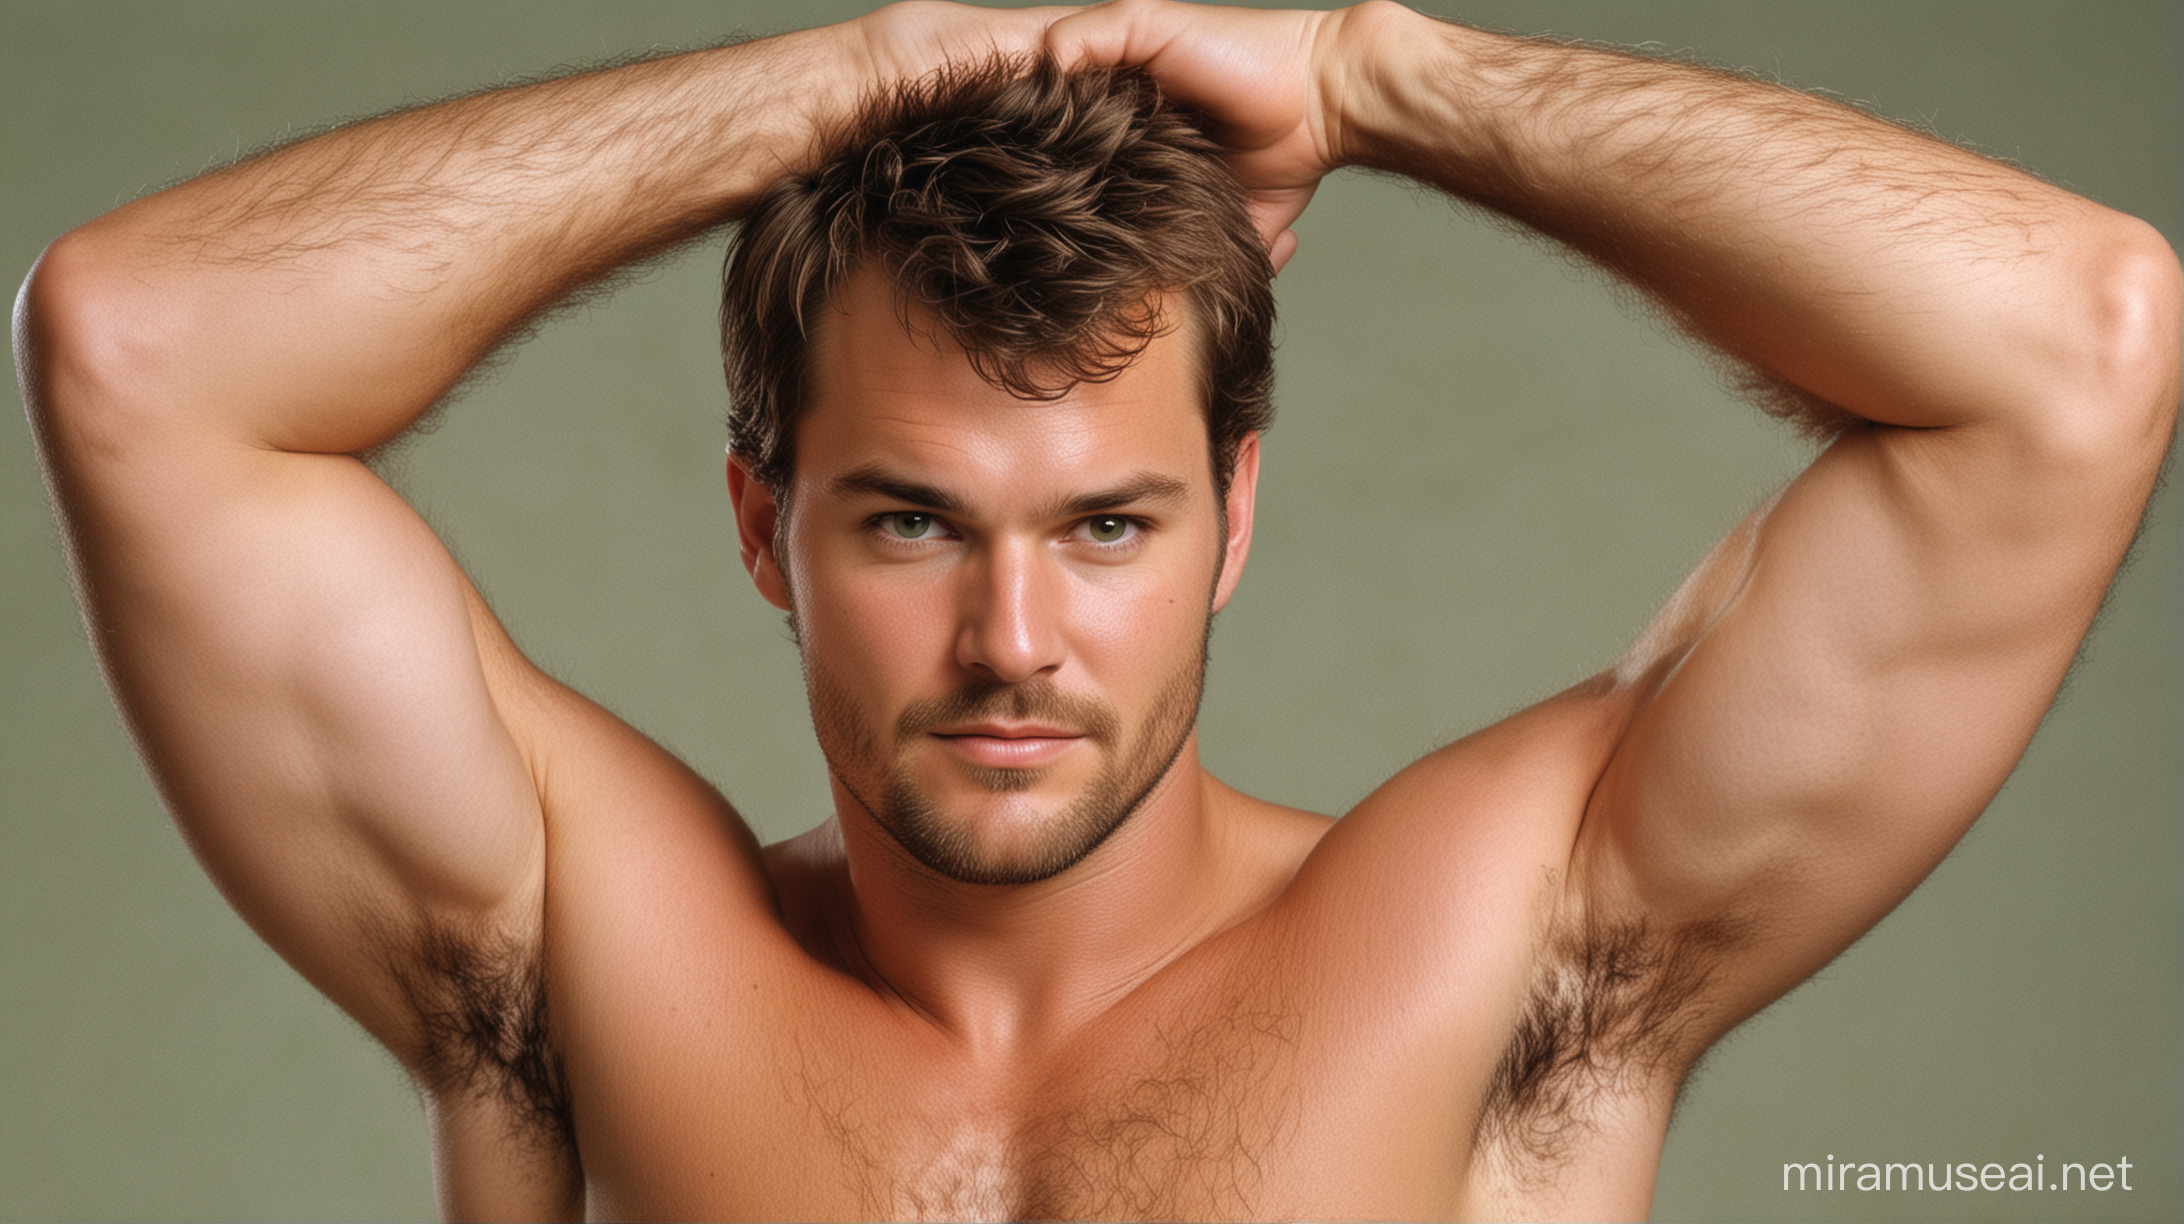 Young version, 25 years old, from the 1990s, very hairy, of actor Chris O'Donnell, thin beard, and very hairy body. O'Donnell, 25 years old, lifting and stretching his arms, showing strength, showing biceps and triceps, showing very hairy armpits, green eyes, no shirt, very hairy chest like in the past, very short hair almost shaved, serious expression, thin beard, very hairy body and chest.
